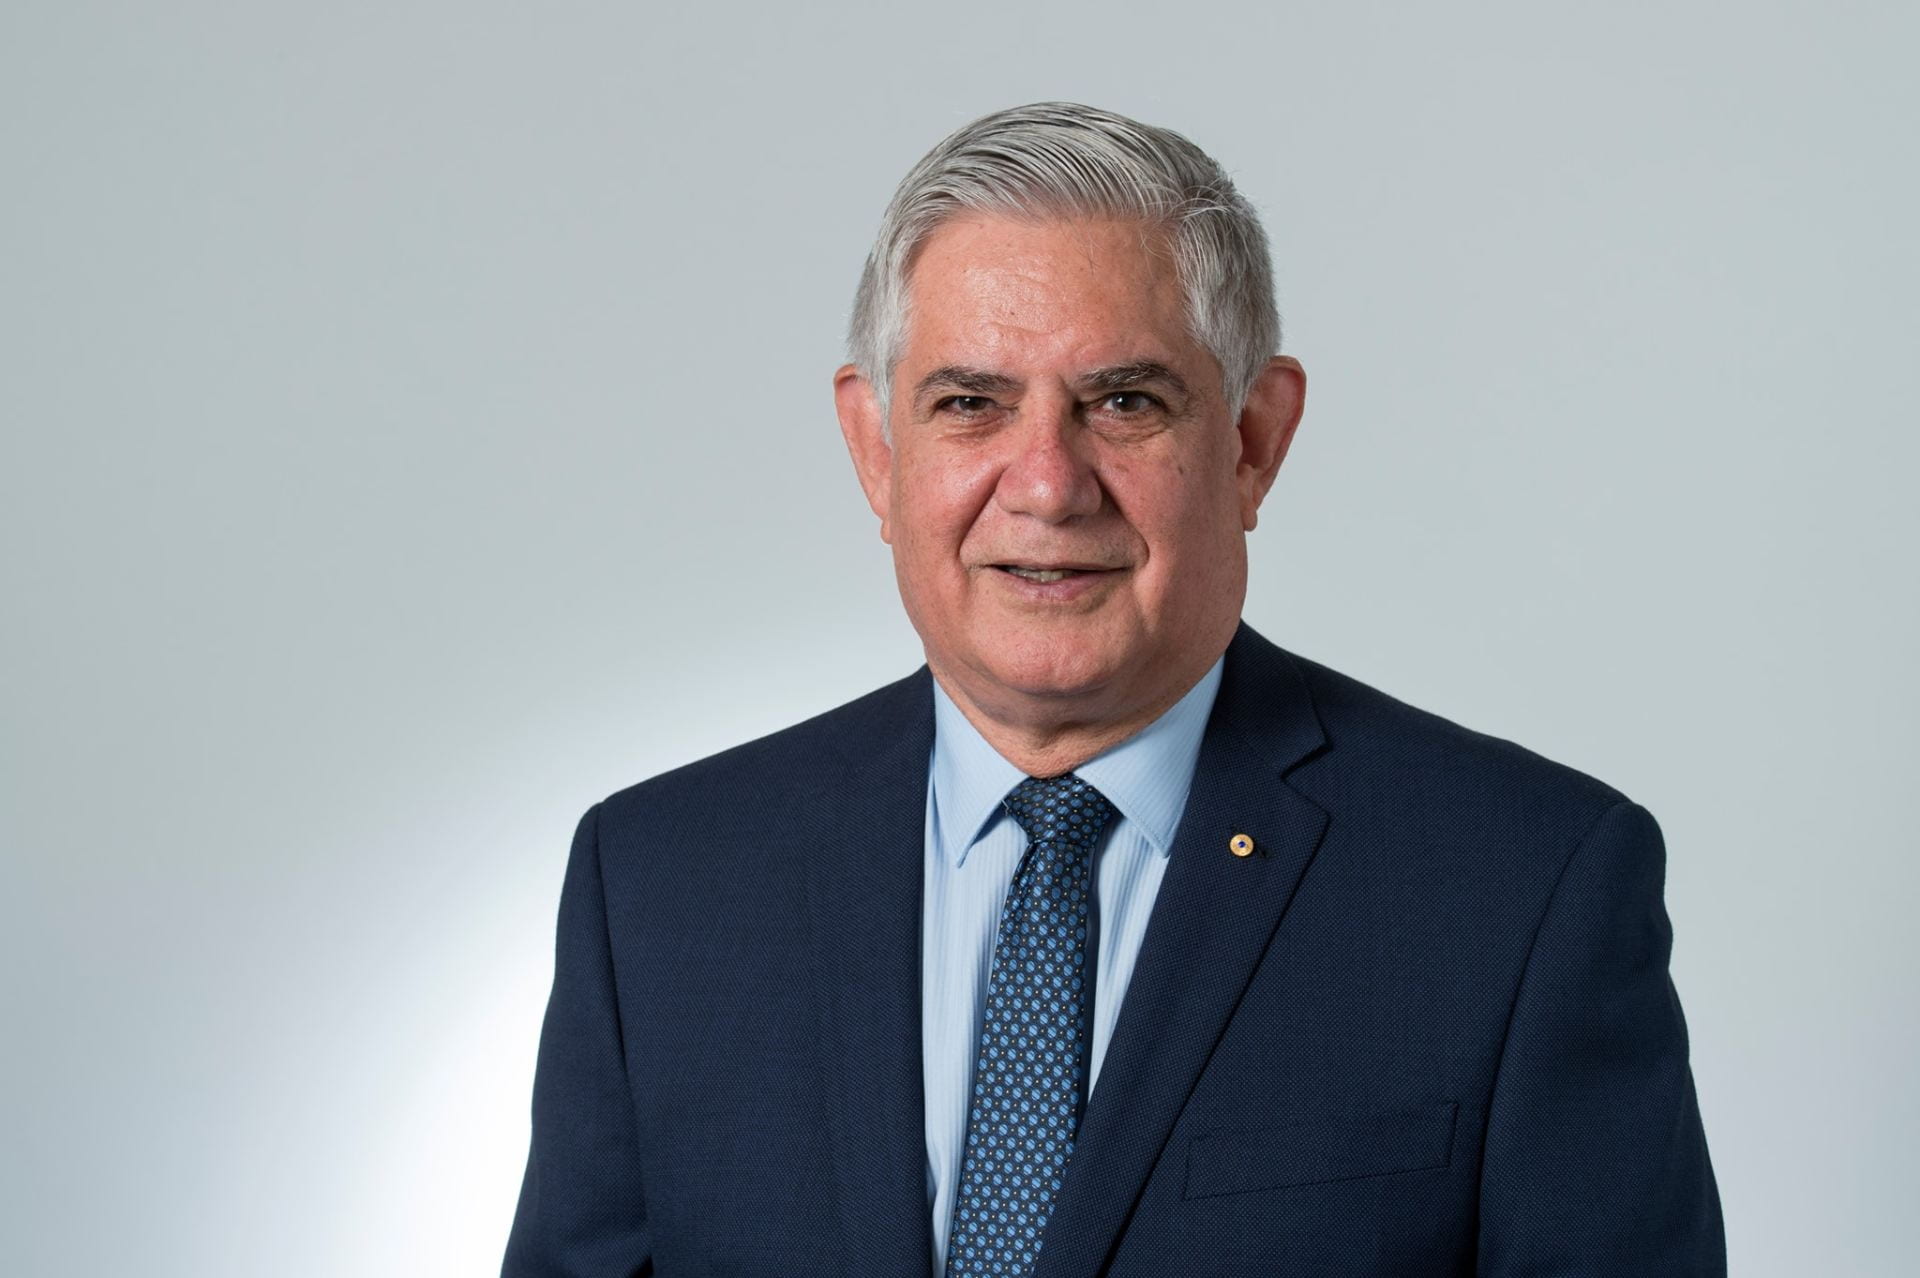 How can we use educational success to redefine Indigenous success? Watch the 2019 Frank Archibald Lecture to hear what Minister Wyatt had to say